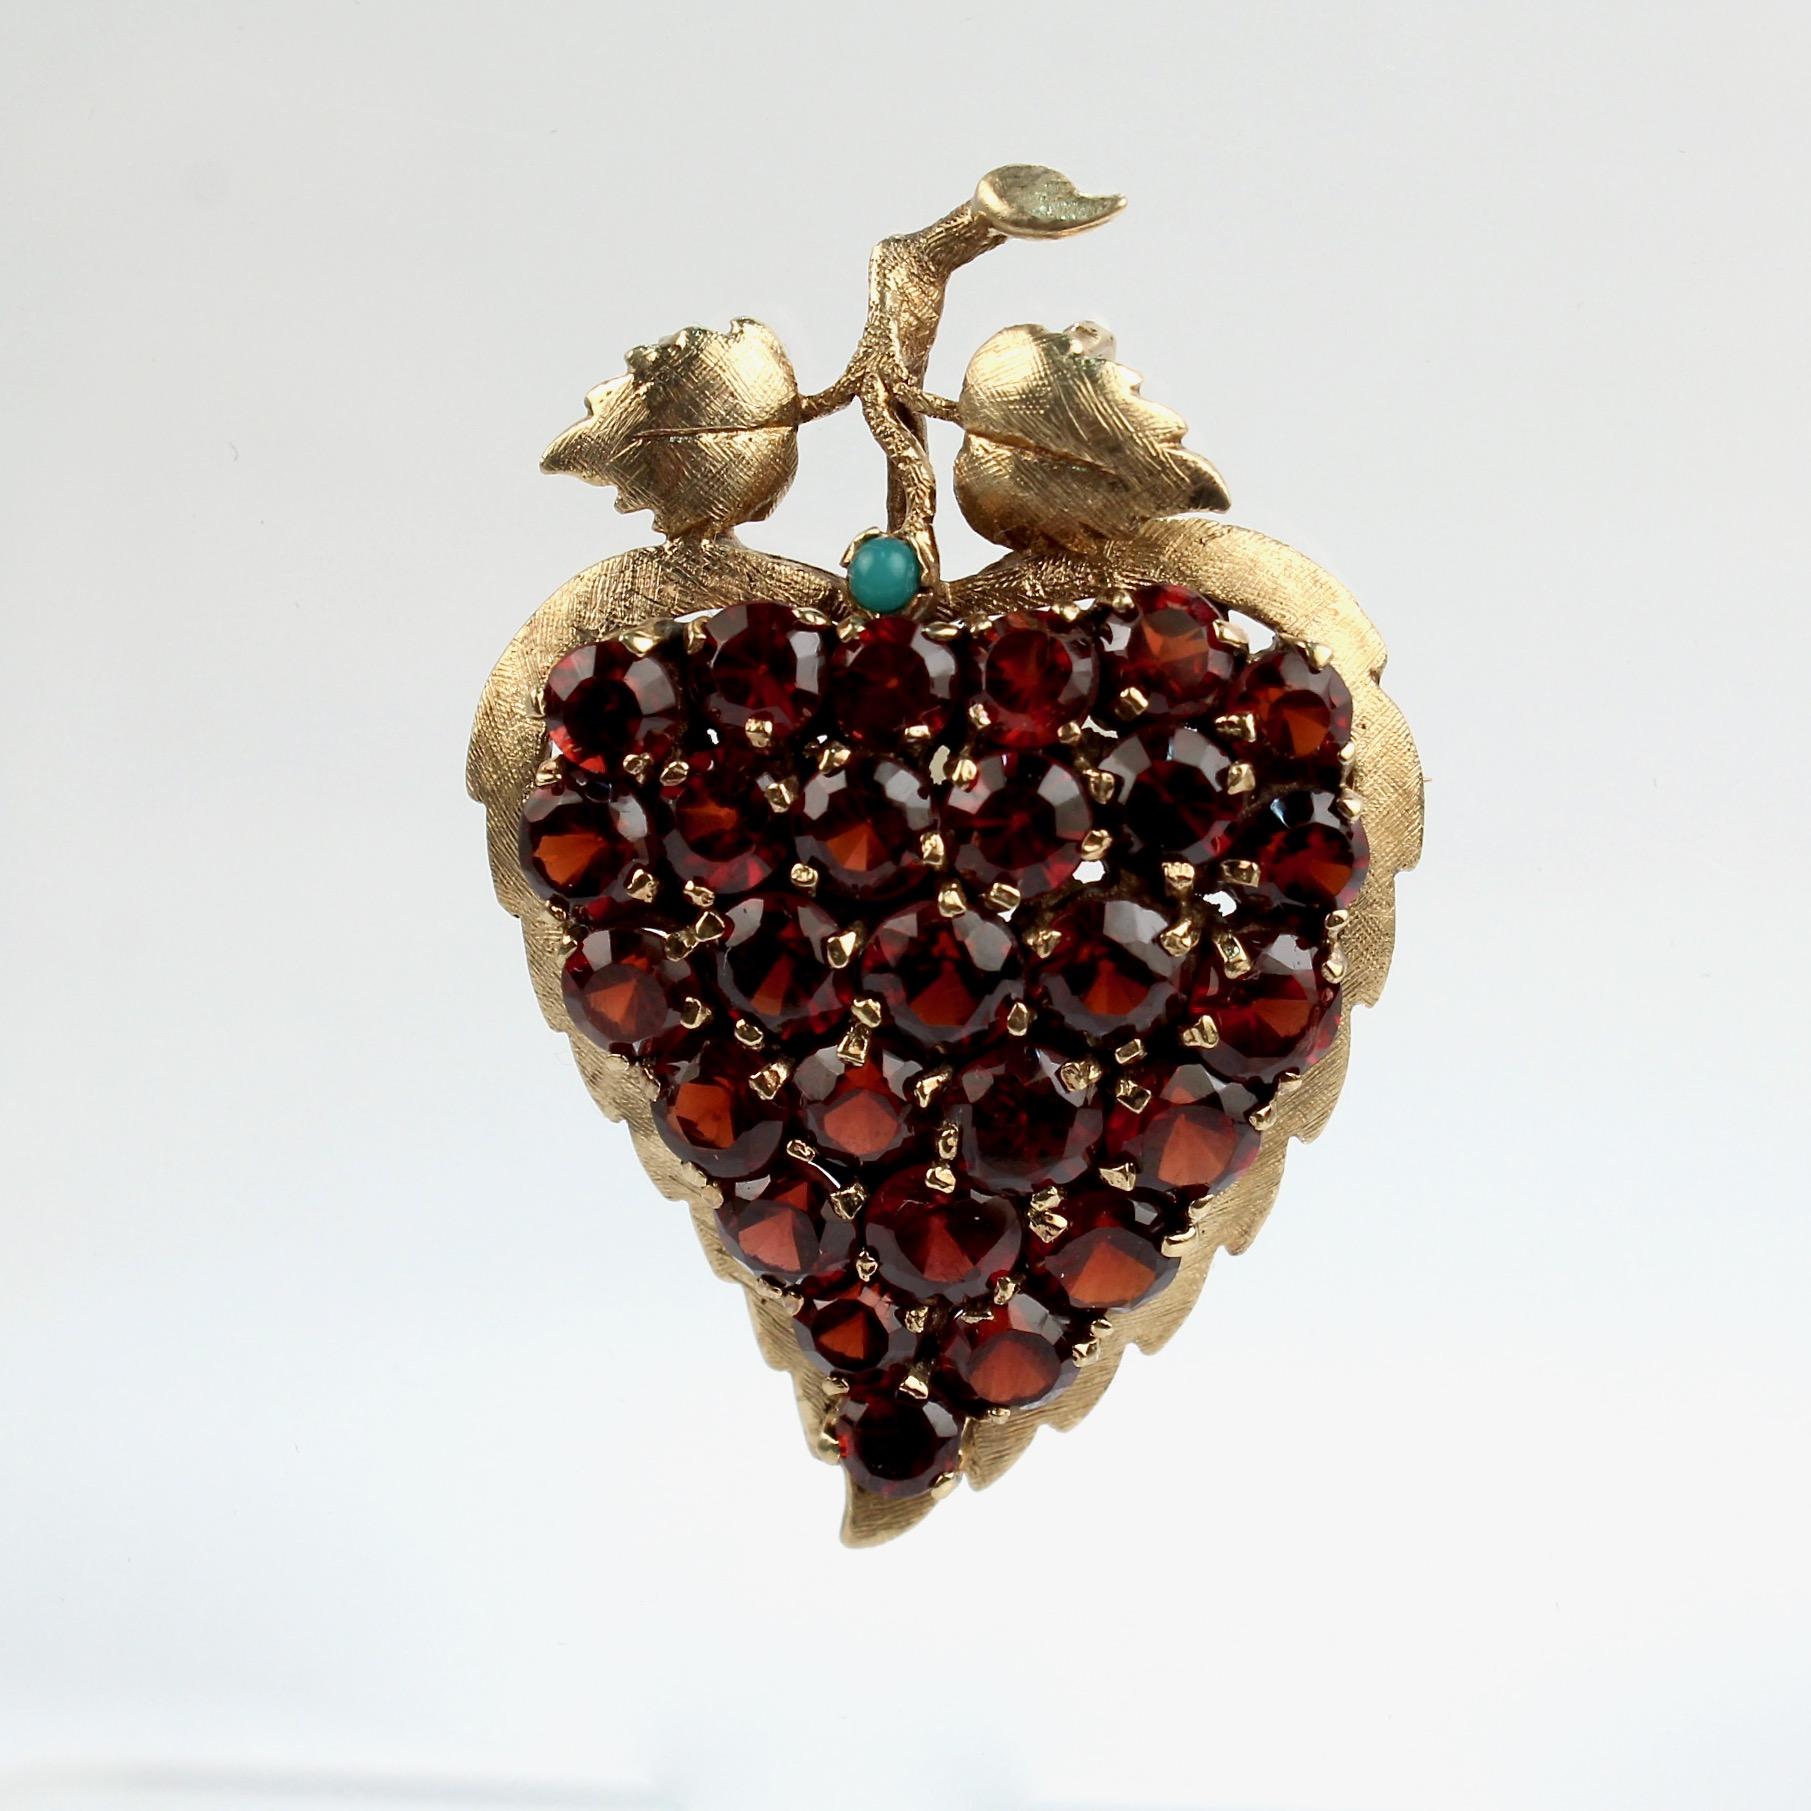 A very fine vintage 10k gold, garnet, and turquoise figural grape cluster brooch. 

In the form of a heart-shaped grape cluster with prong-set garnets as grapes and a figural stem and leaves set with a single small turquoise cabochon.

Simply a